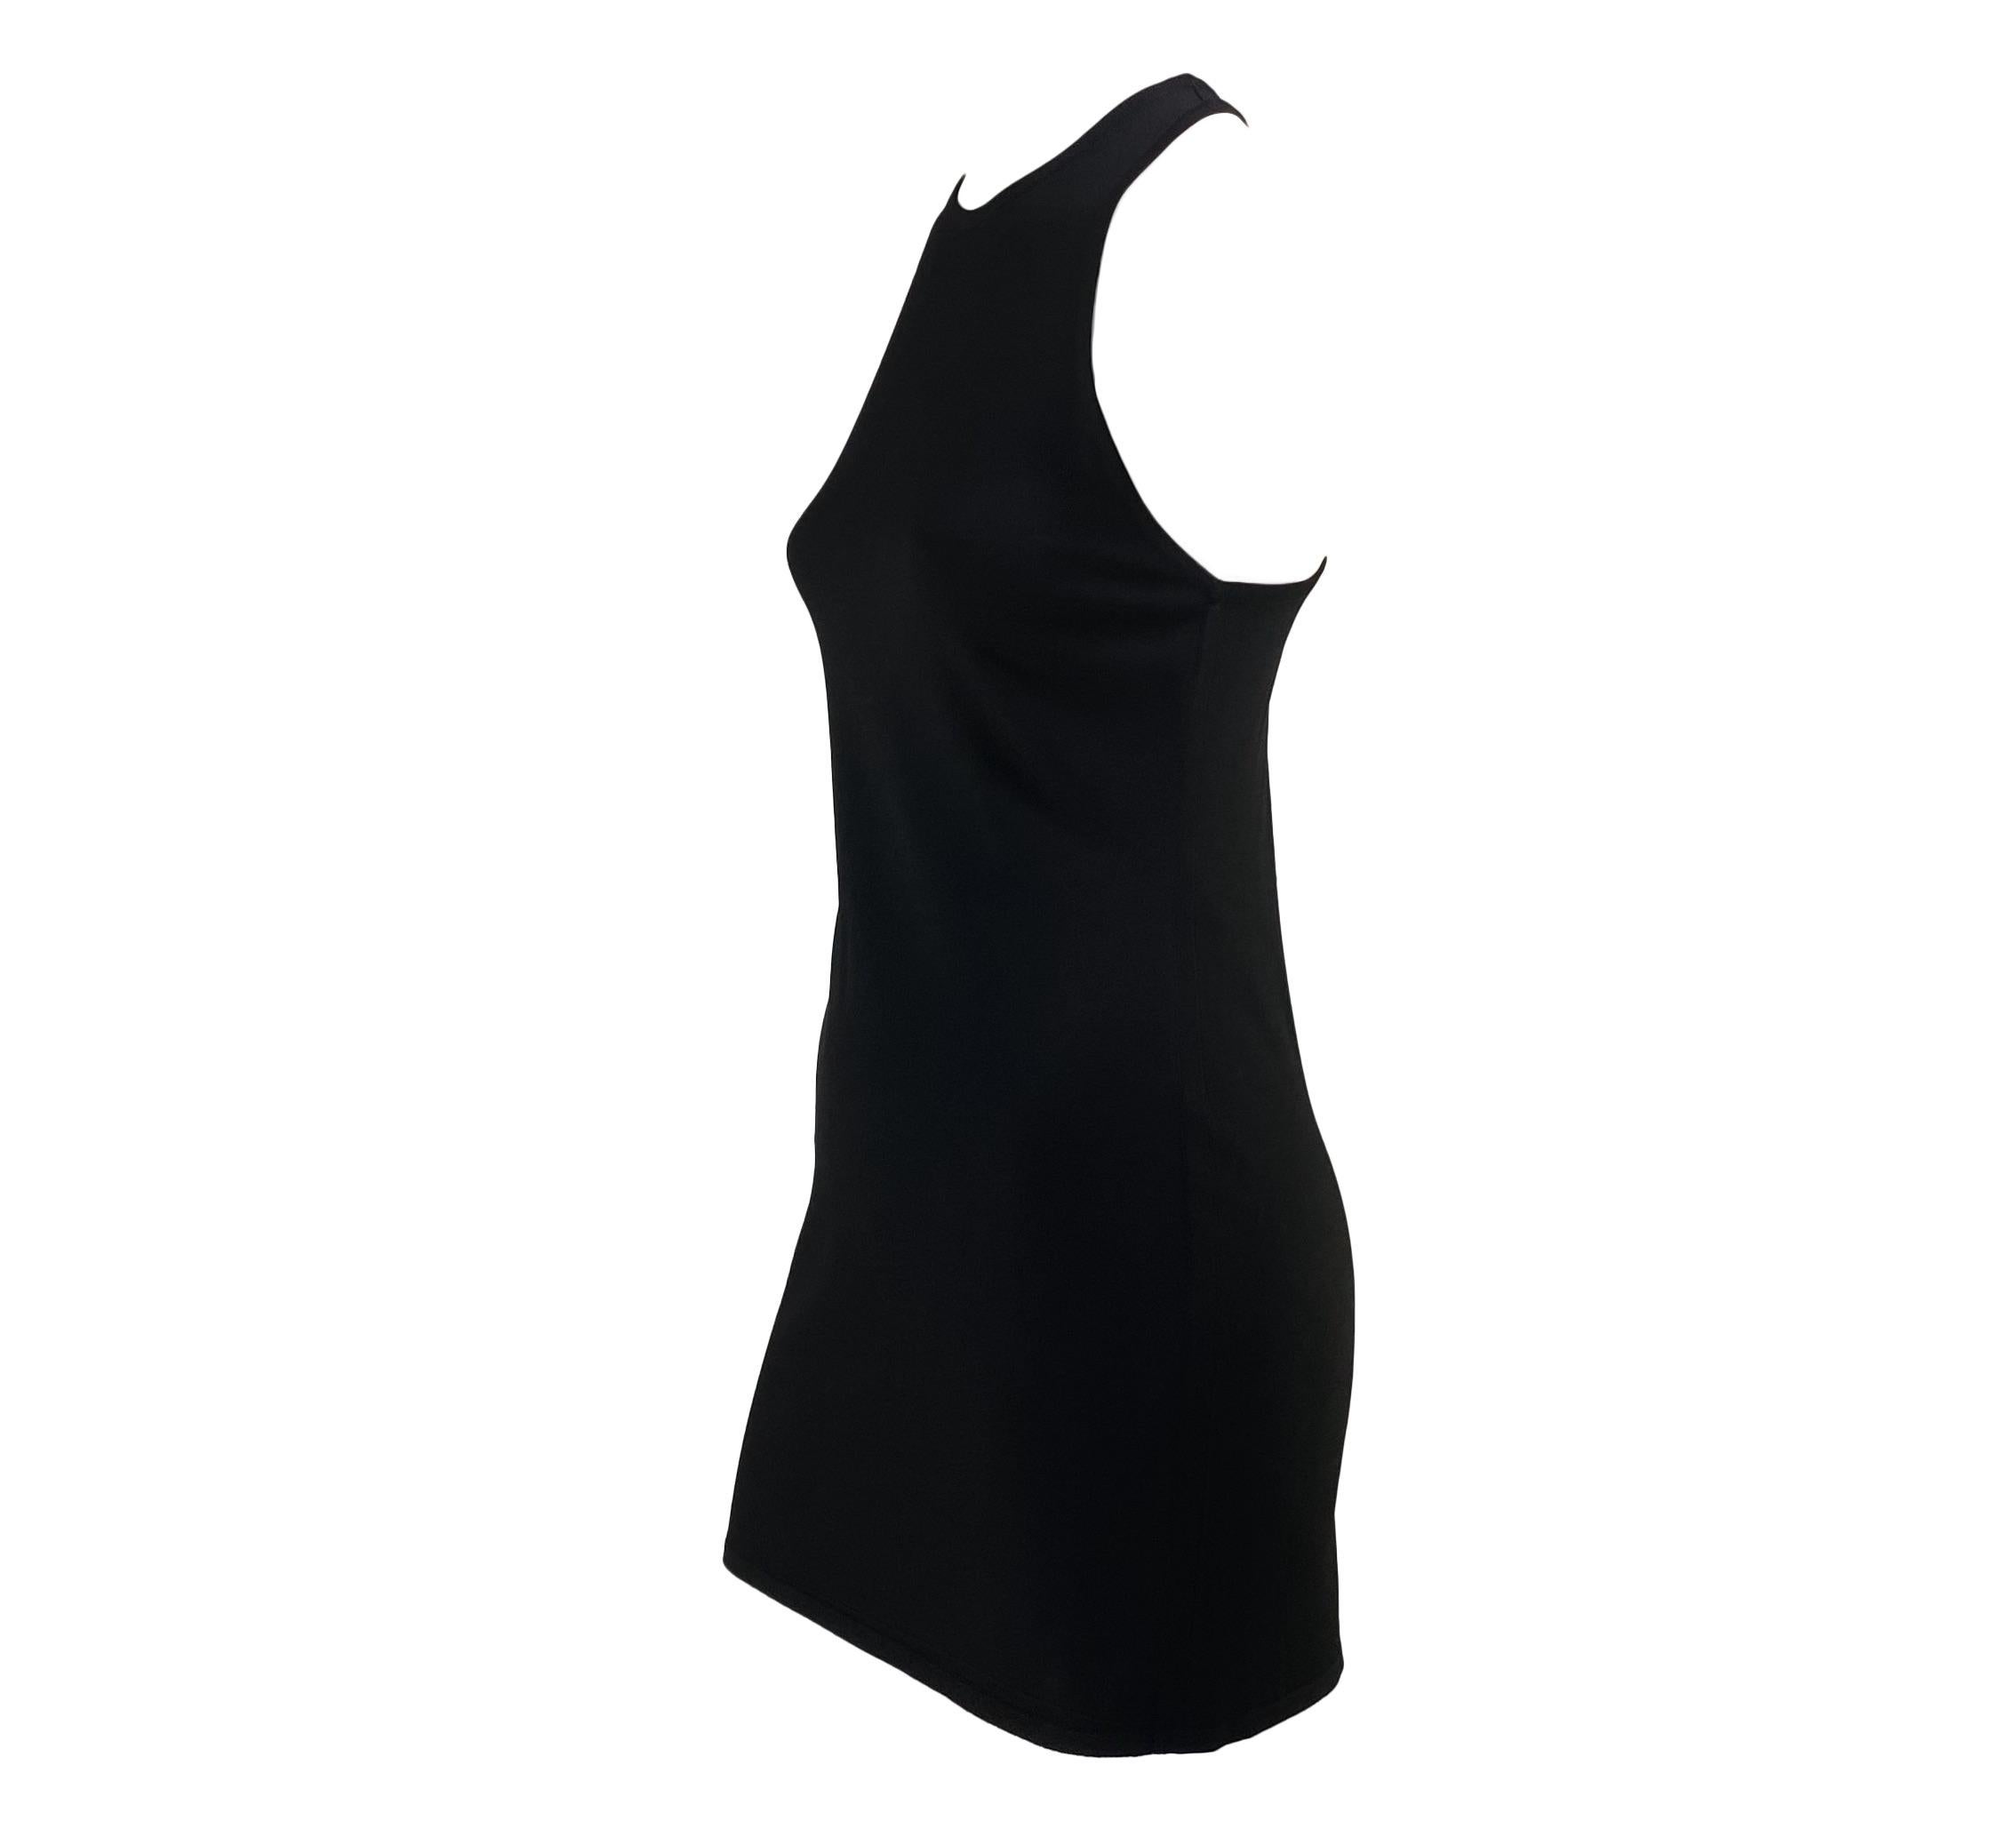 TheRealList presents: an iconic racer back Gucci dress with a square 'G' accent, designed by Tom Ford for the Spring/Summer 1998 collection. This stunning dress clings to the body with a semi-elastic knit fabric, enhancing the wearer's curves. This